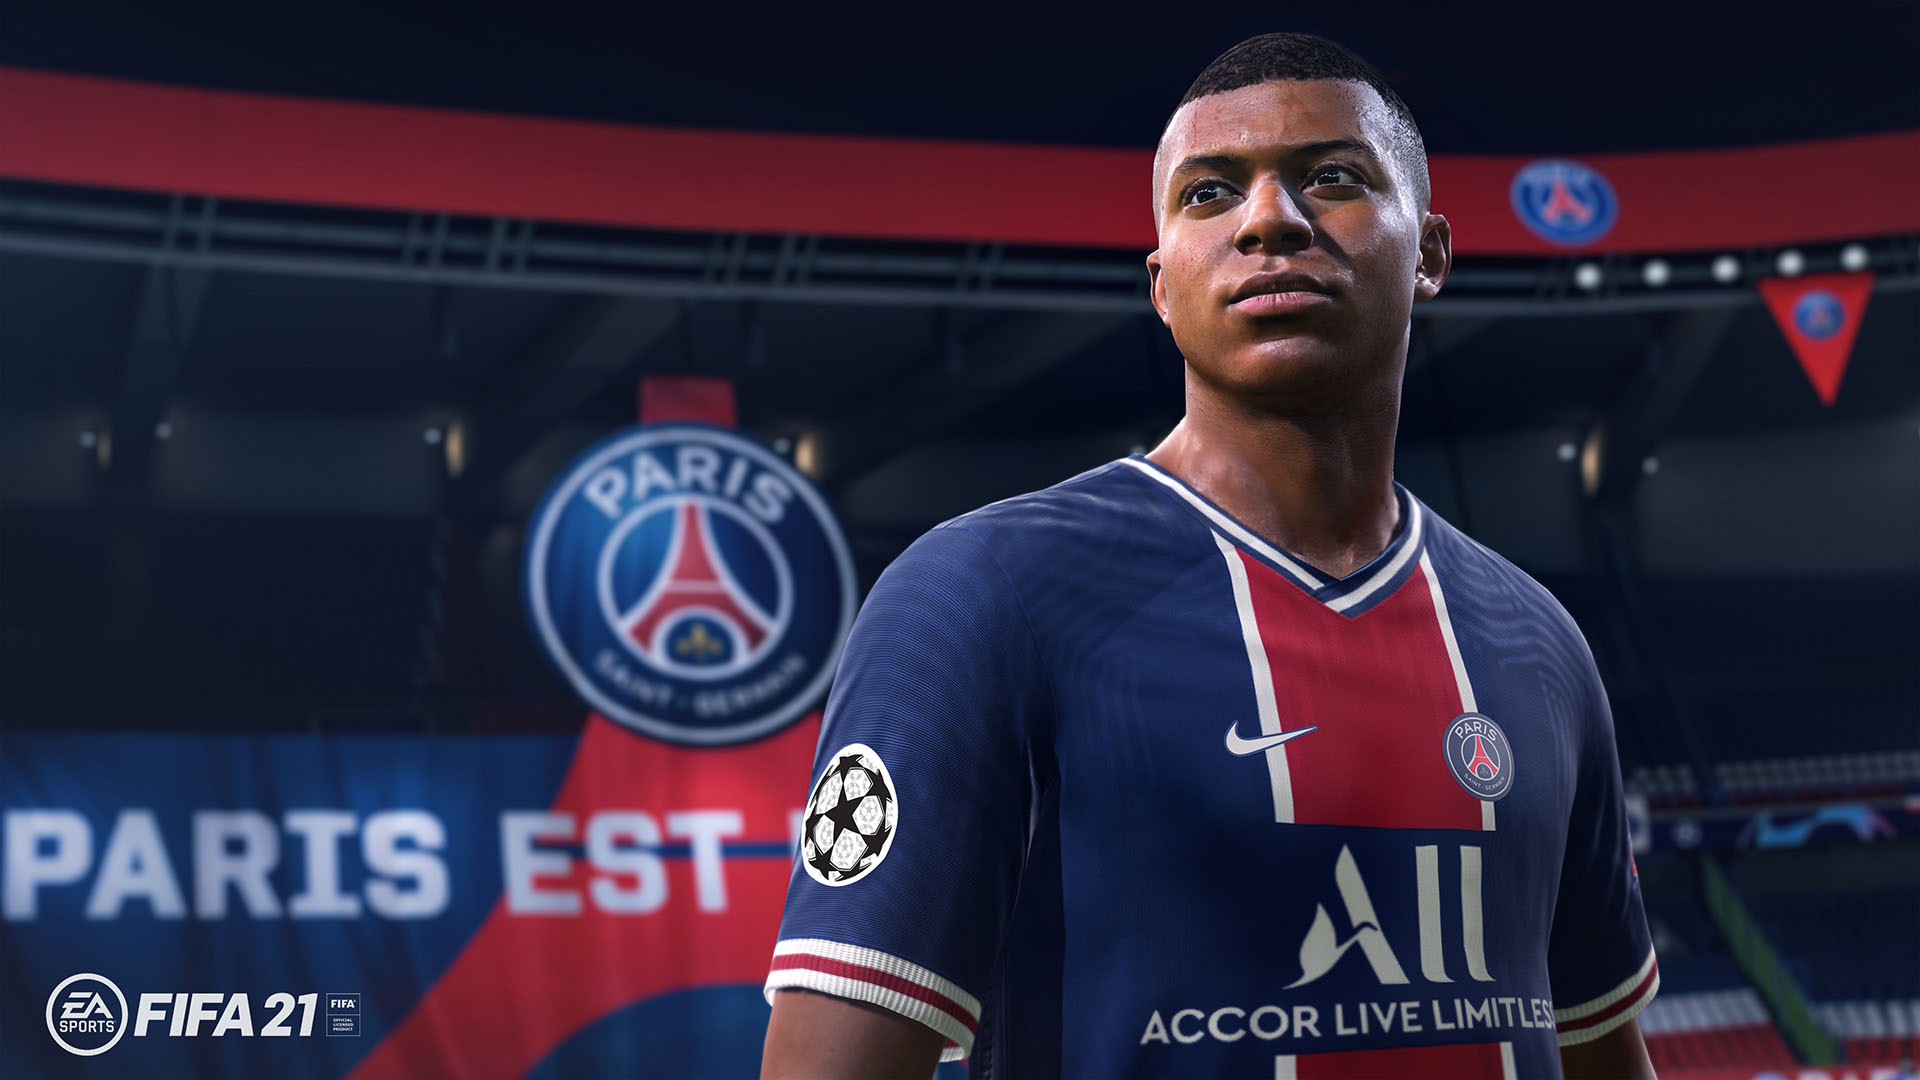 FIFA scripting lawsuit withdrawn after EA provides detailed